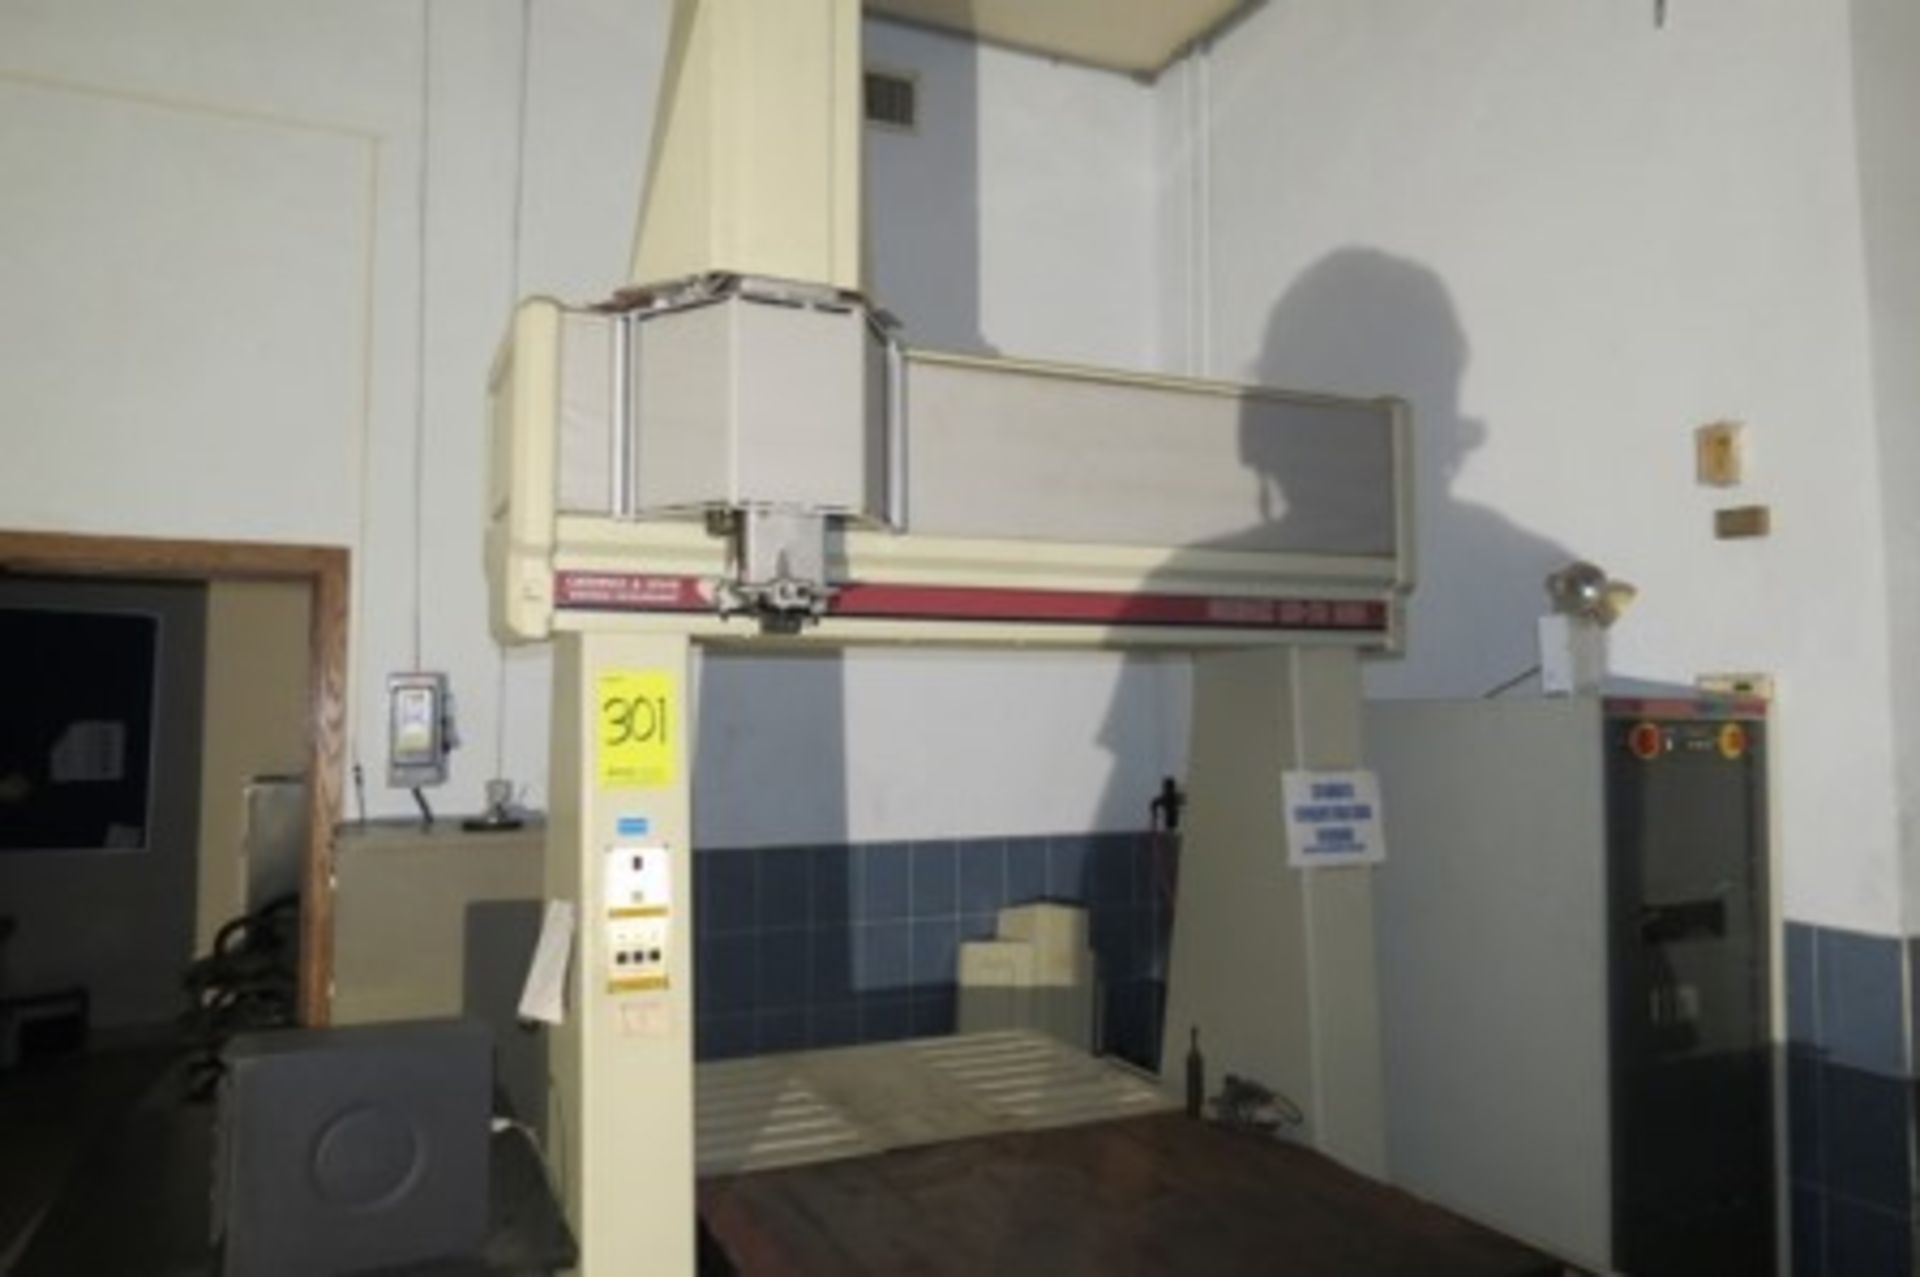 Giddings & Lewis Cordax RS-70 s/n A-0831-1094, coordinate measuring machine - Image 7 of 23